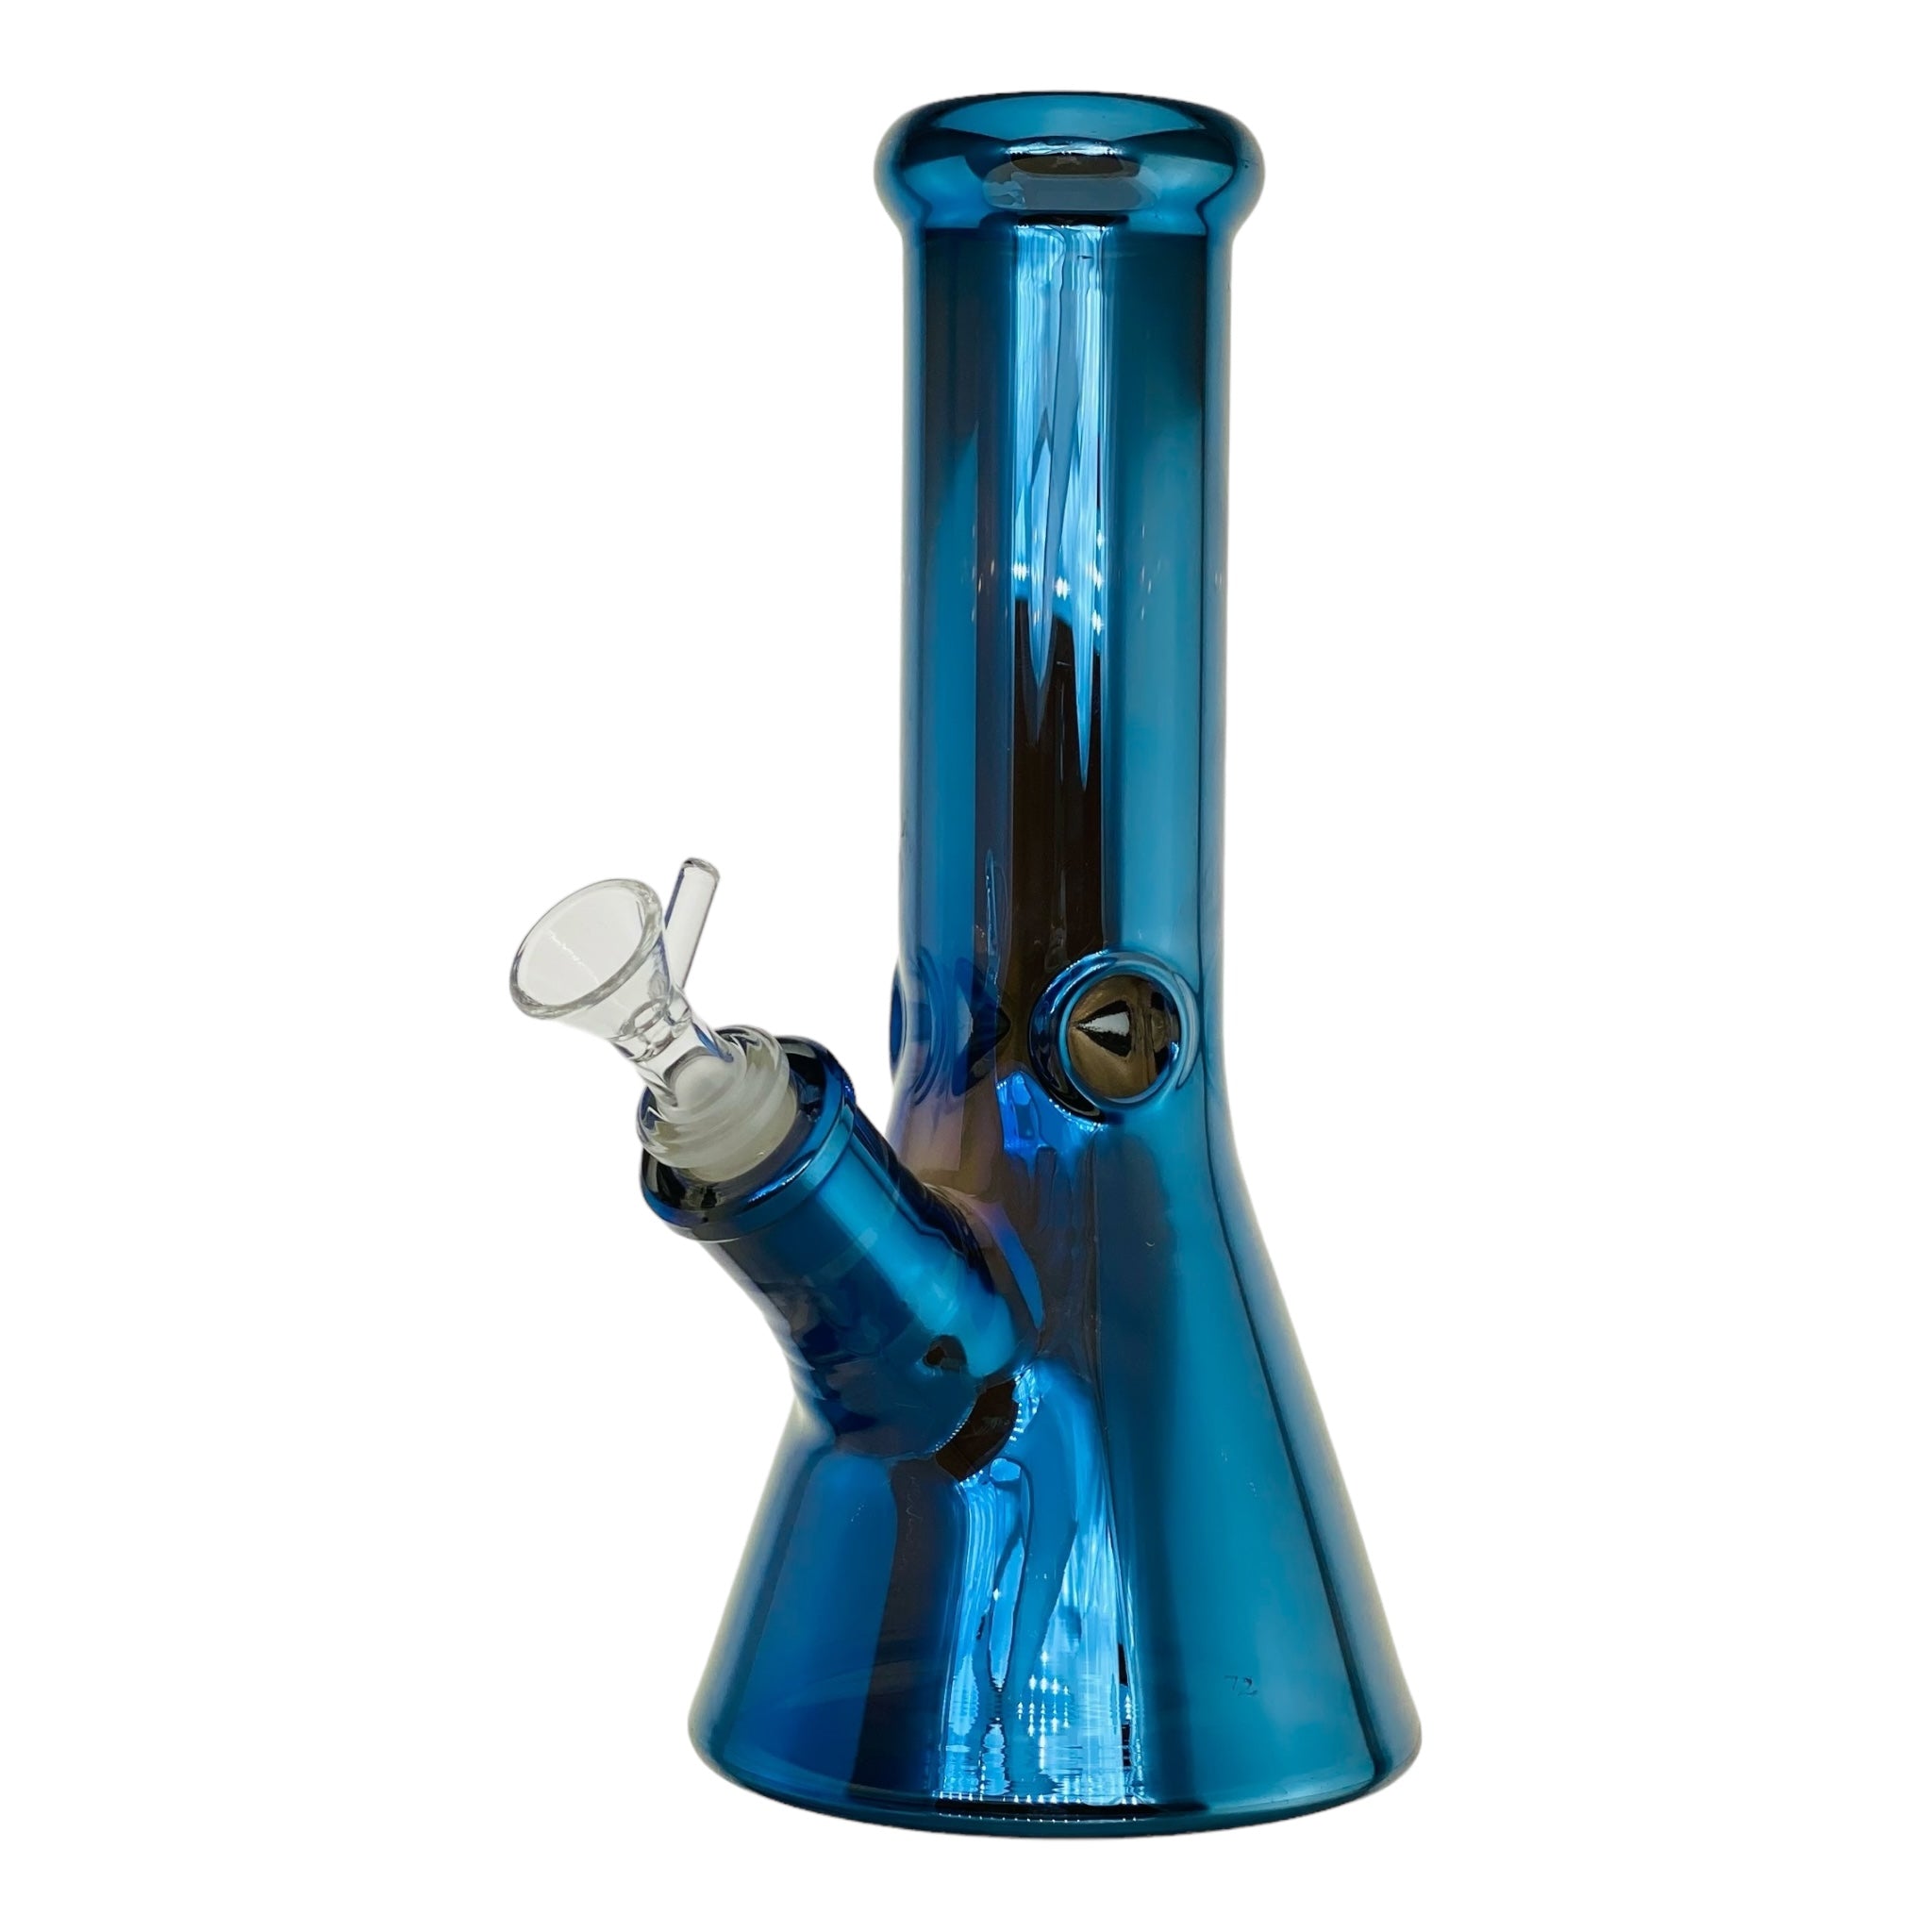 blue metallic glass water bong pipe for weed and tobacco for sale free shipping